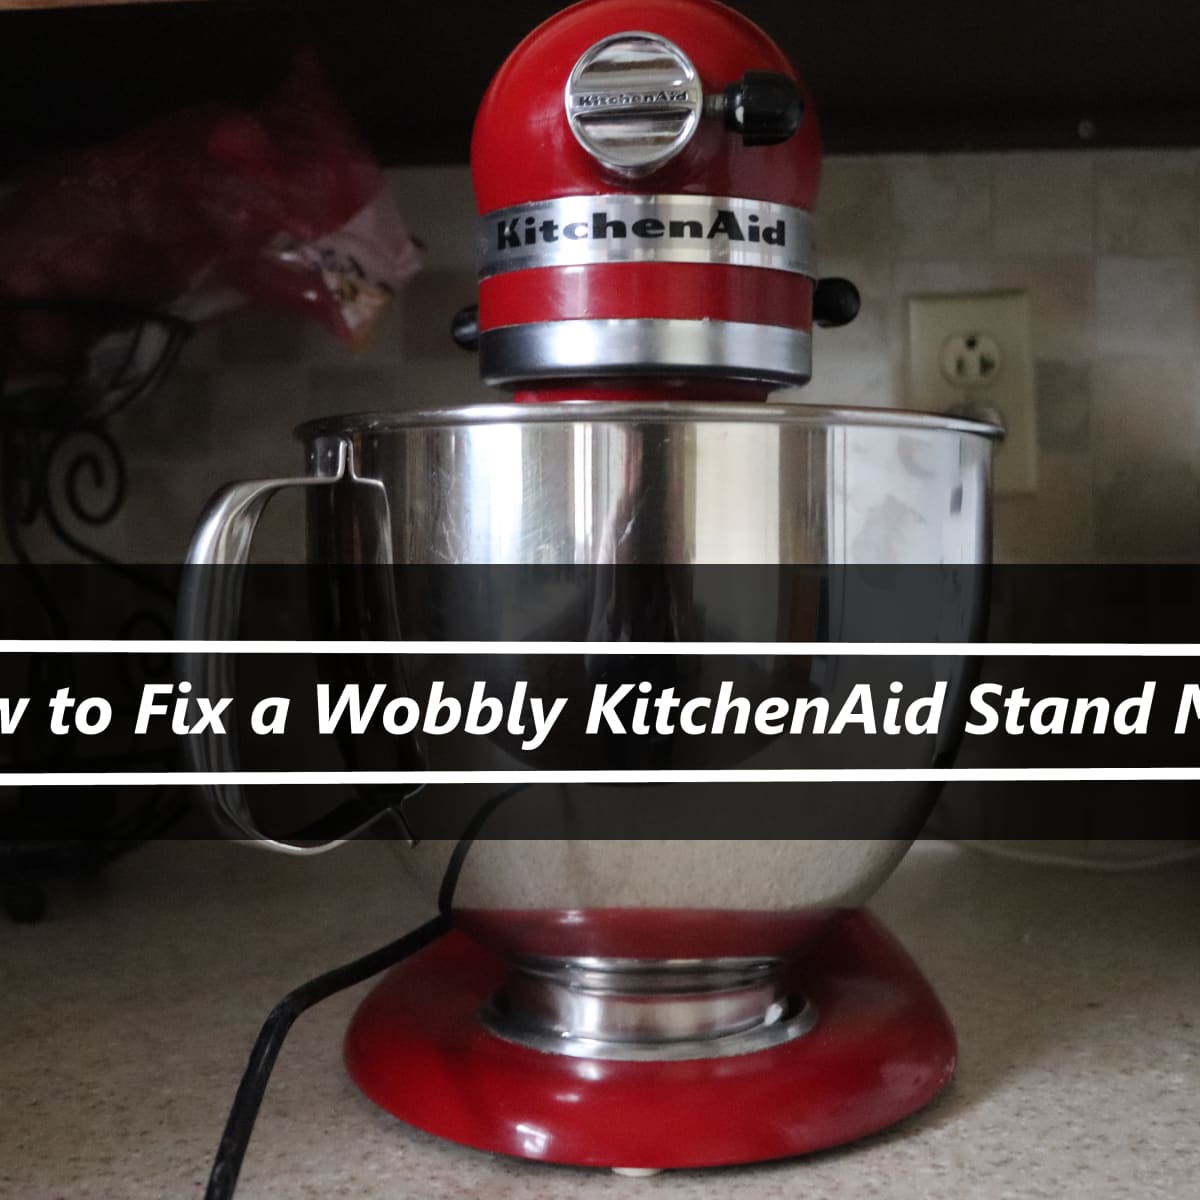 Is Your KitchenAid Mixer Leaking Oil? Use These Tips on How to Fix It.